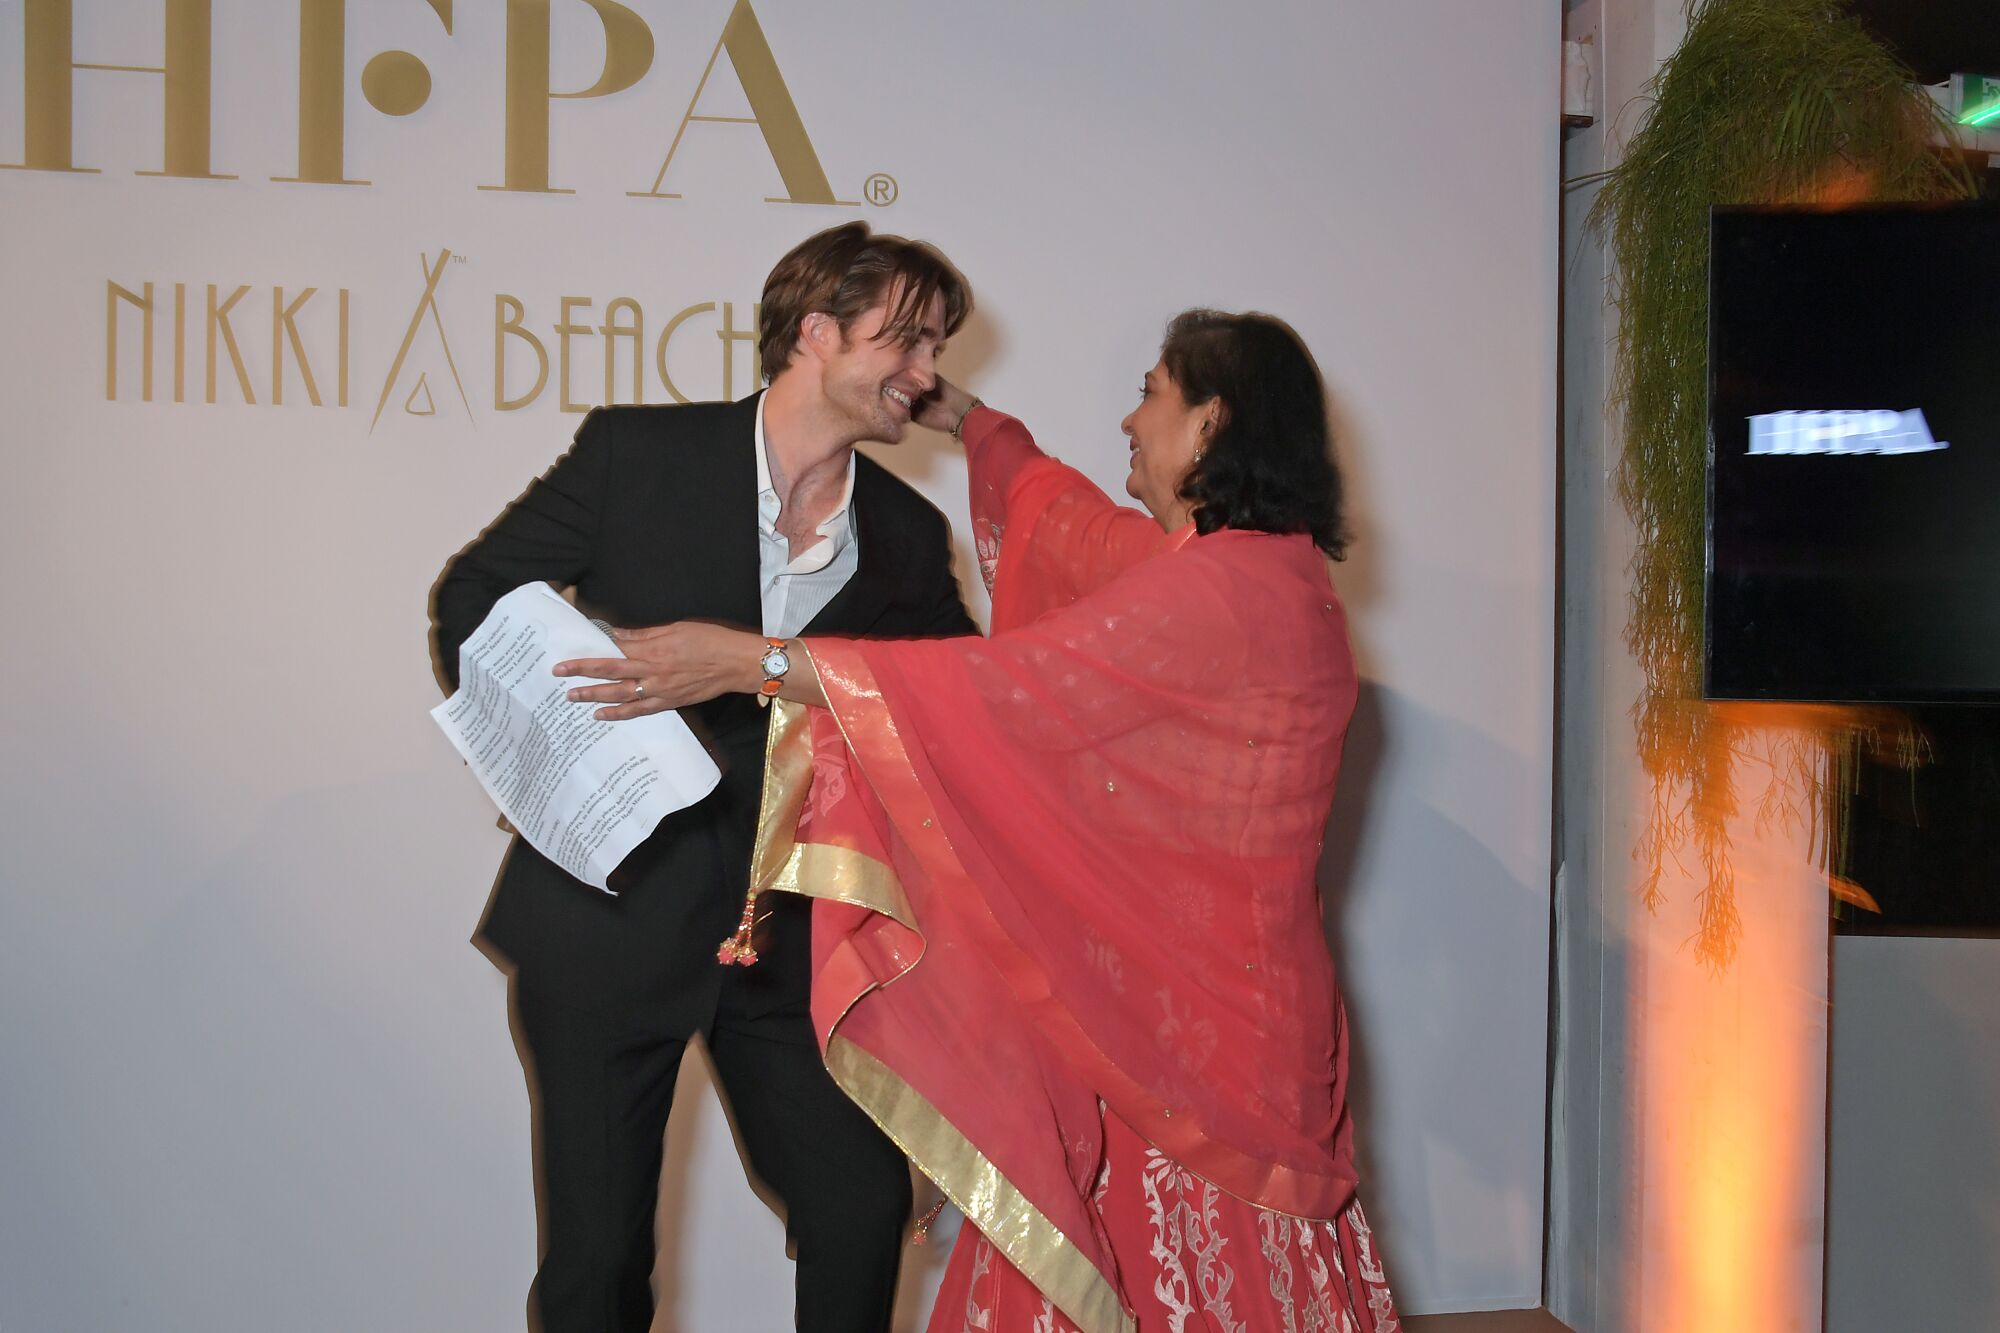  Robert Pattinson and former HFPA President Meher Tatna move in to hug each other